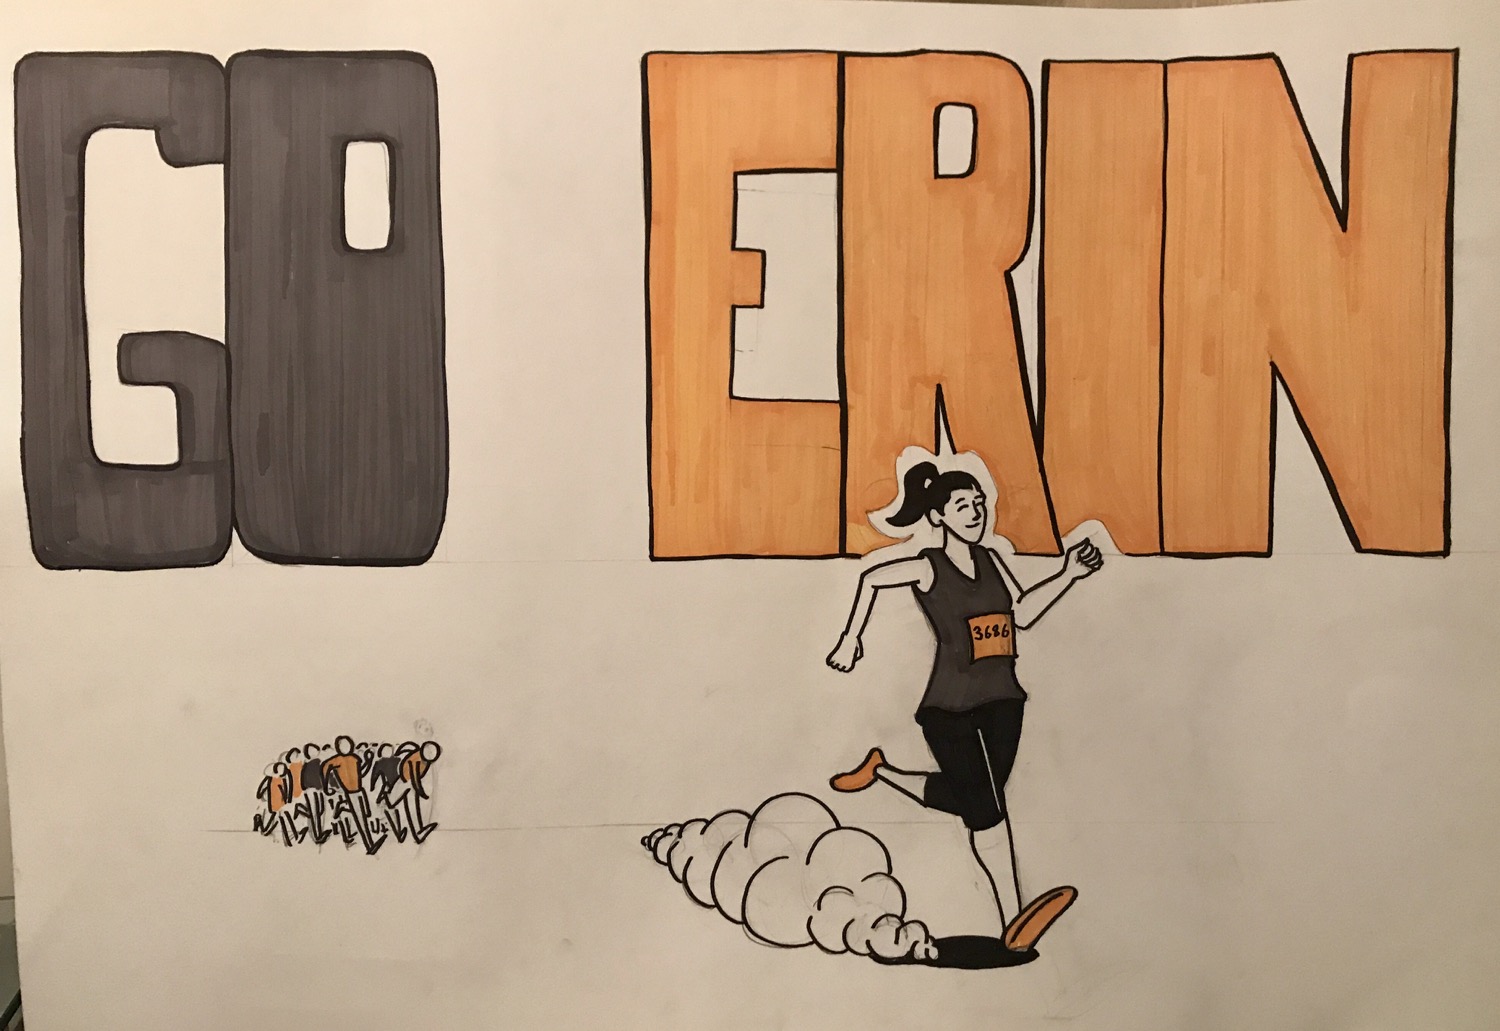 A photo of an illustrated sign I made for Erin's half marathon on Sunday. It says "GO ERIN" and has a picture of her running ahead of a crowd.